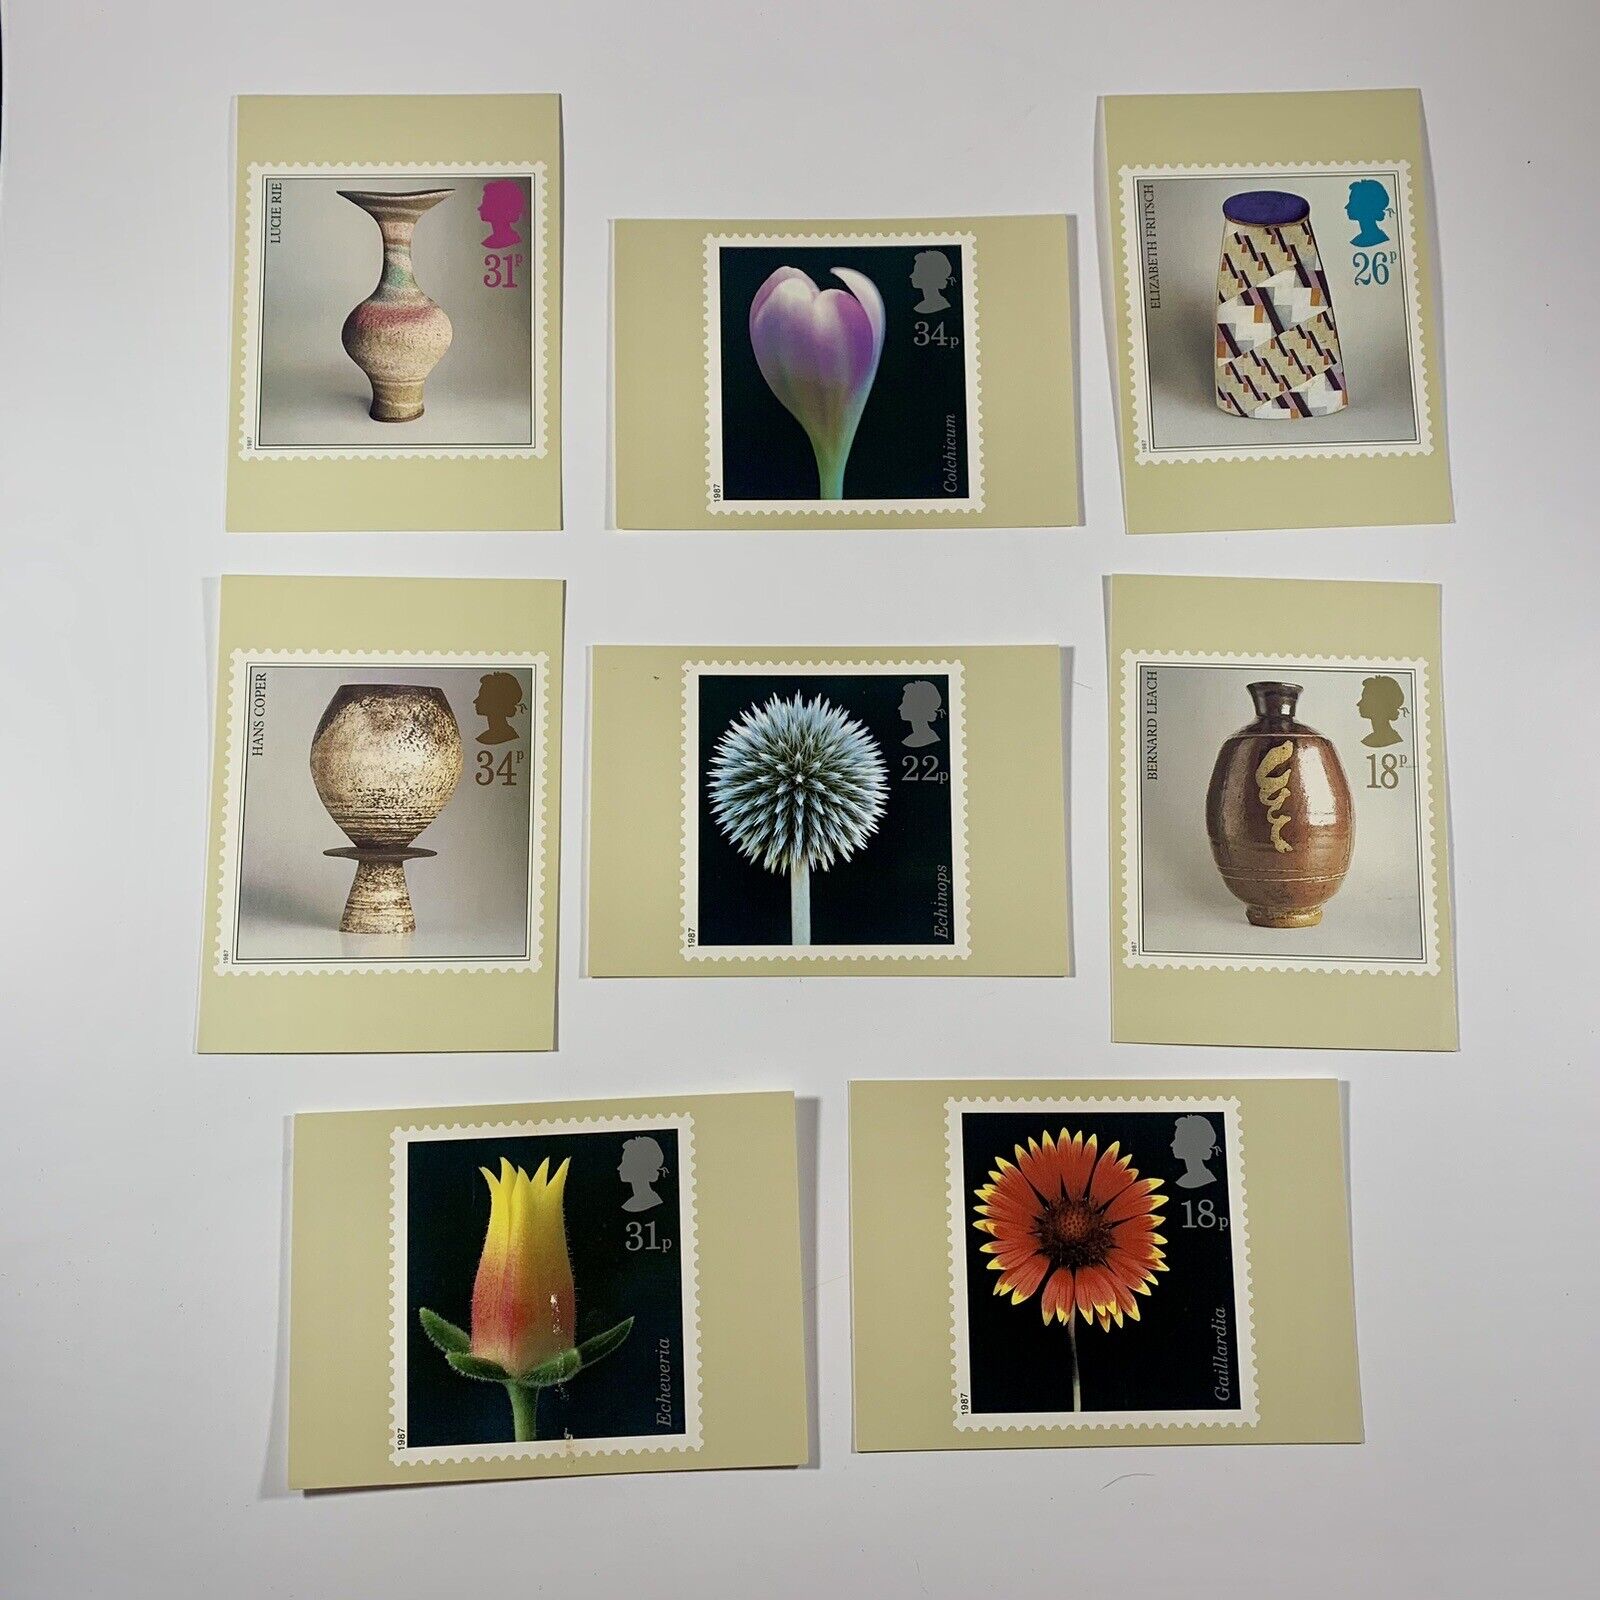 1987 Collectors Year Pack British Mint Stamp Postcards, Set Of 8 Flowers Pottery